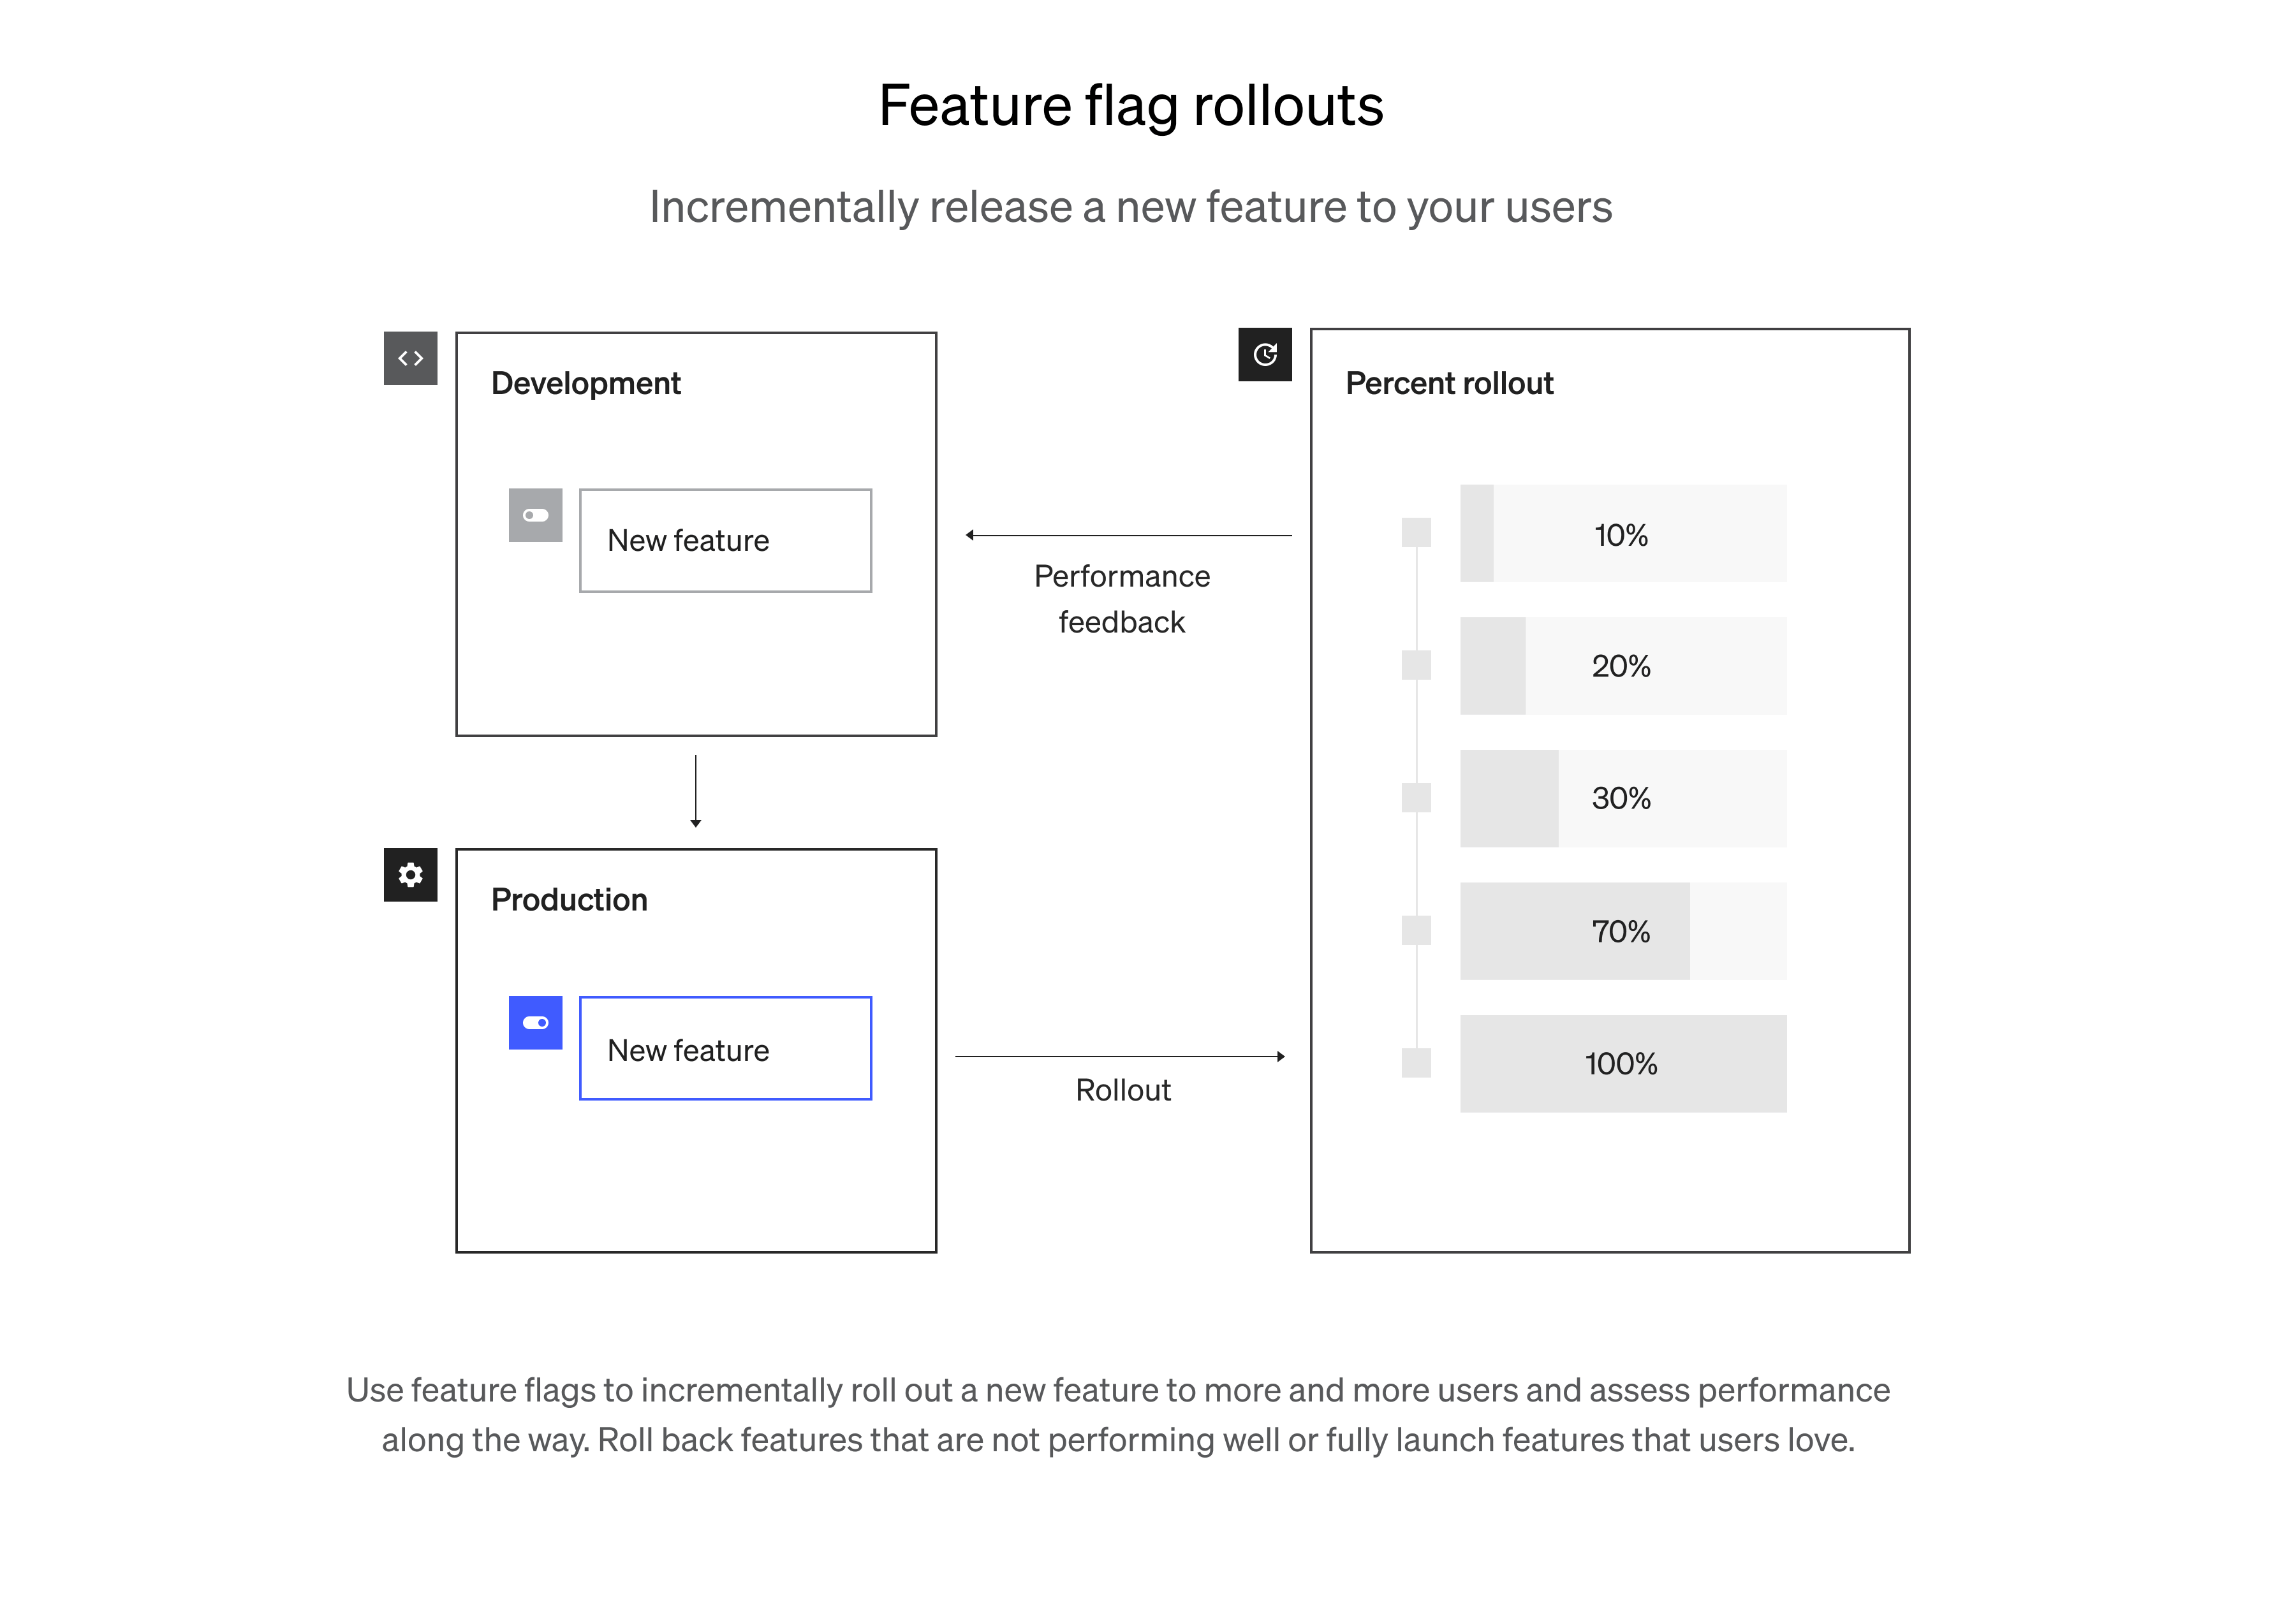 Feature flags rollouts infographic